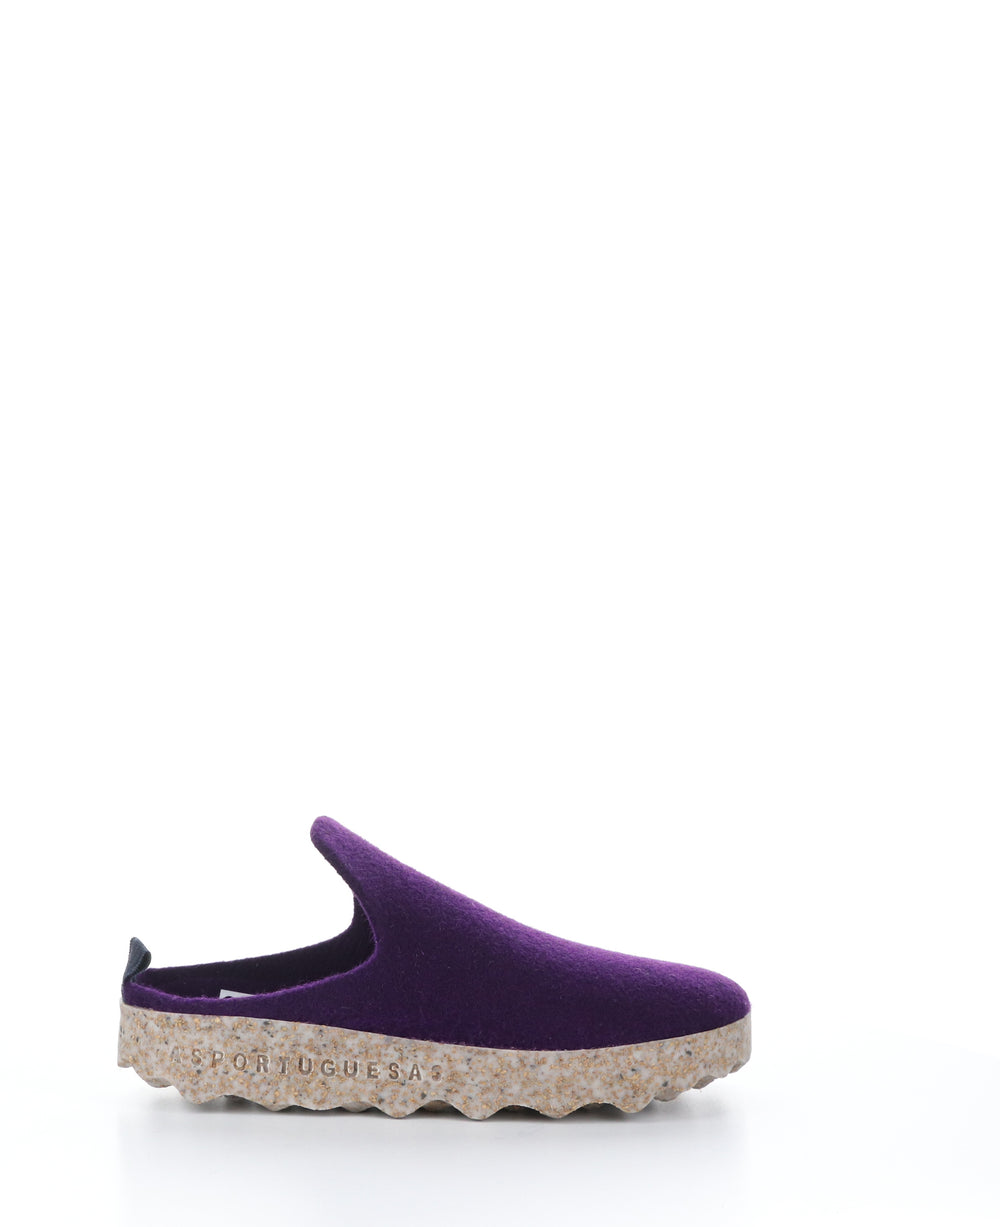 COME023ASP Dark Purple Round Toe Shoes|COME023ASP Chaussures à Bout Rond in Violet